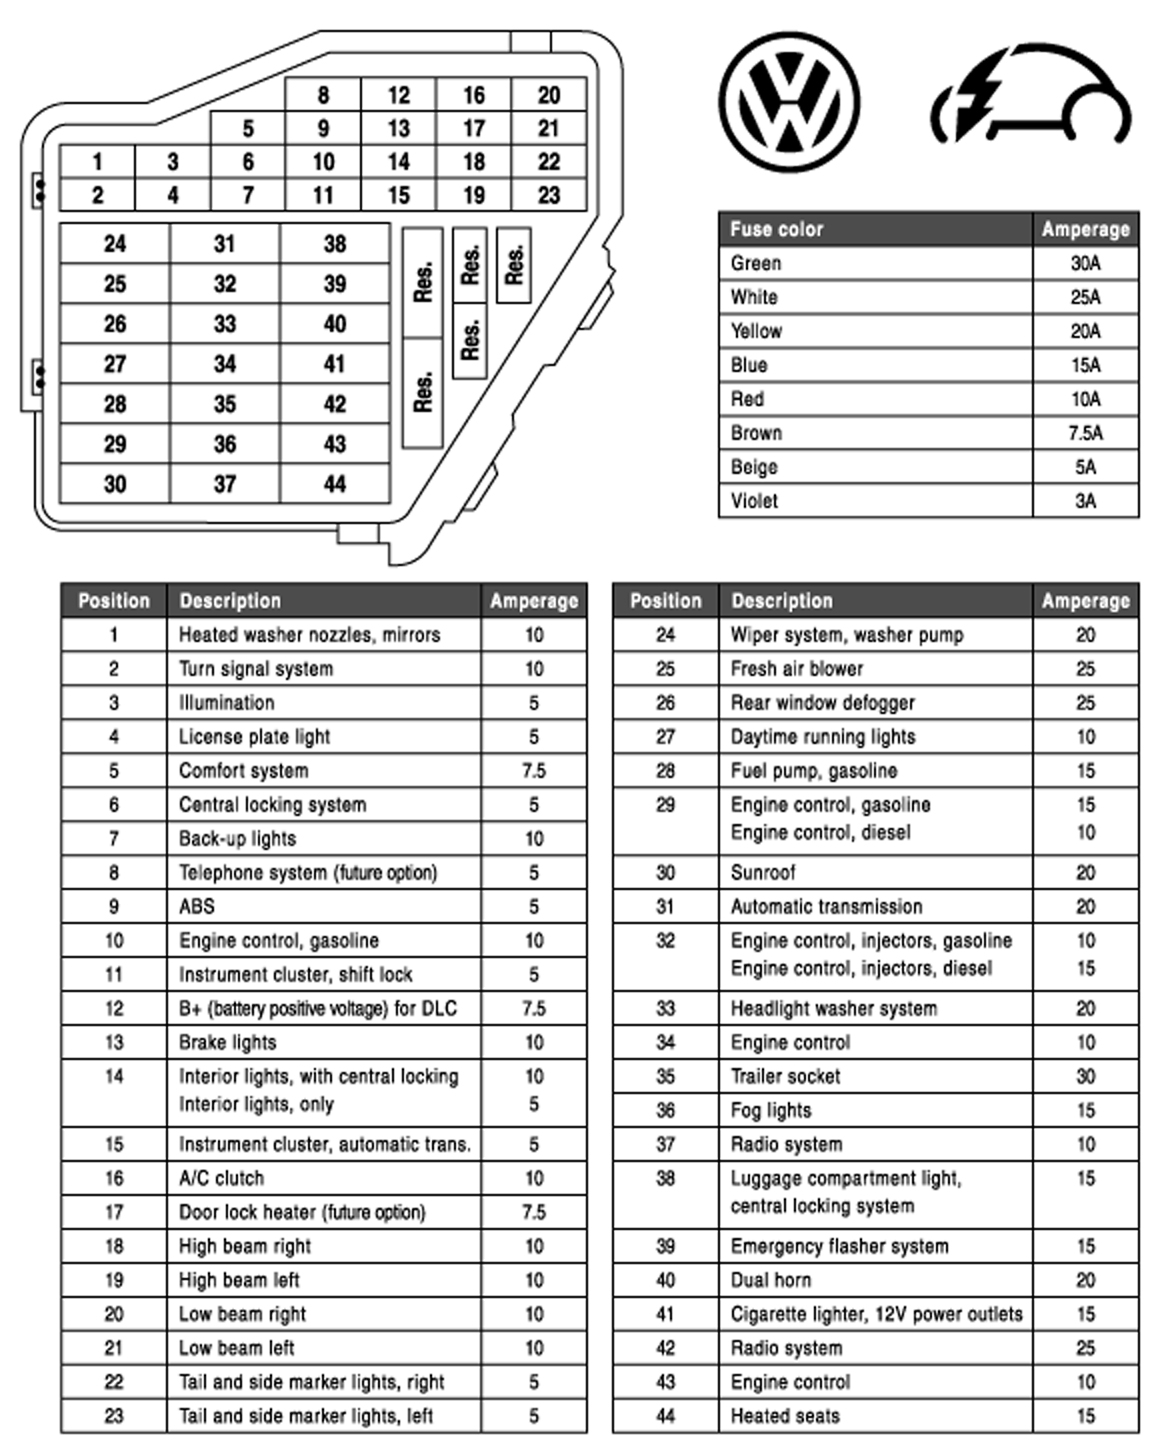 Fuse Box Description and Amperage Settings For “New ... 2001 volkswagen beetle main fuse box diagram 